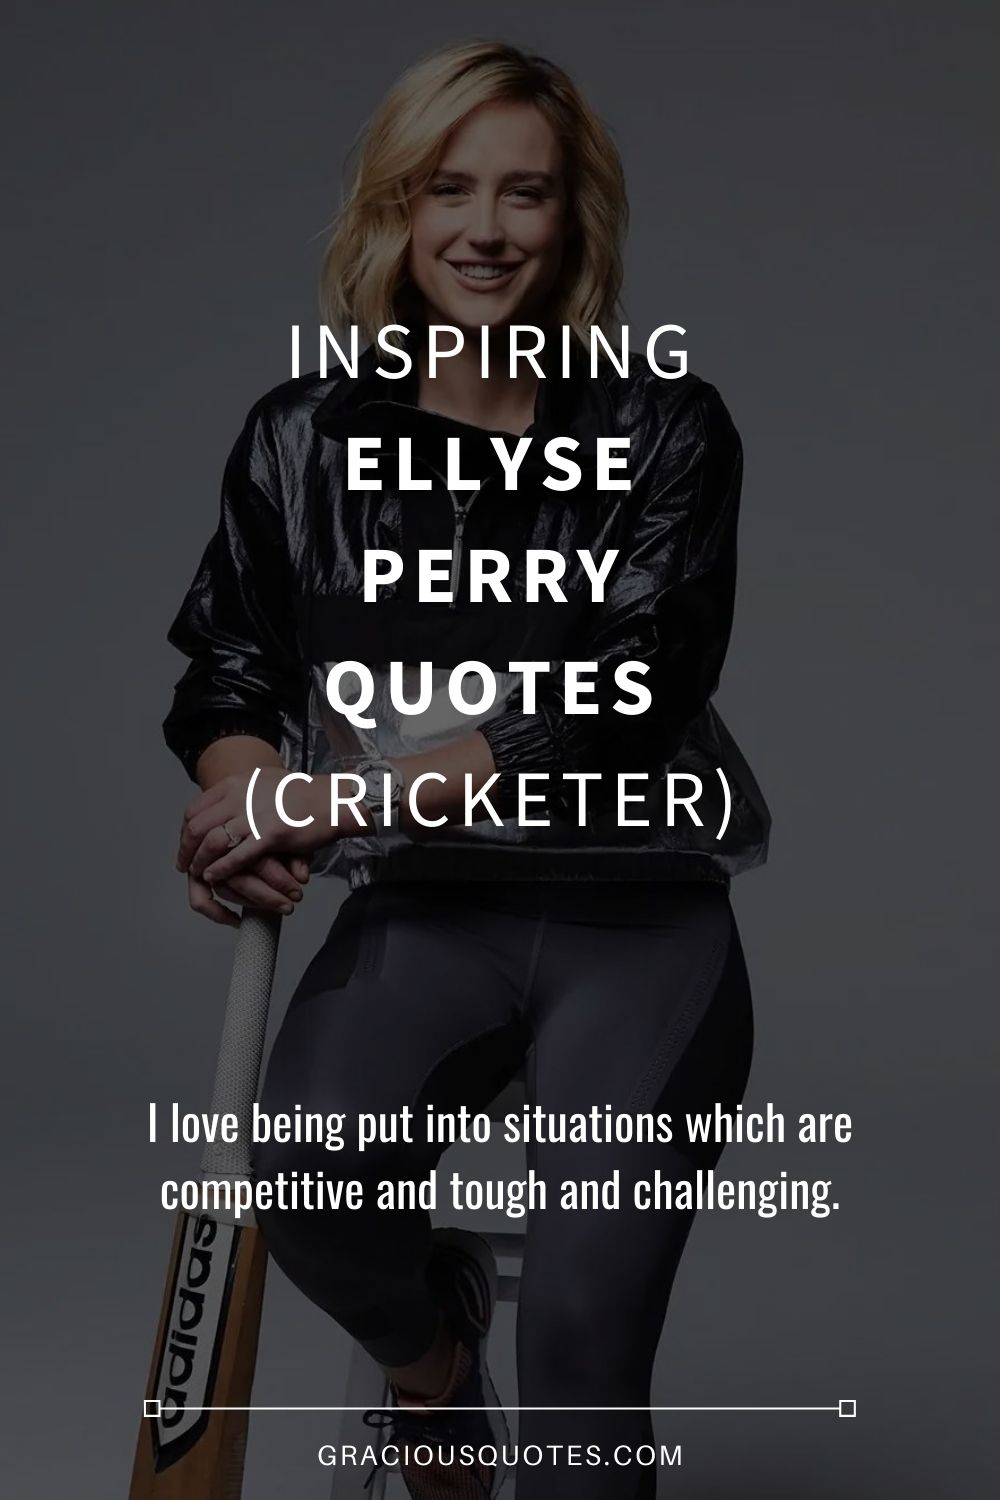 Inspiring Ellyse Perry Quotes (CRICKETER) - Gracious Quotes